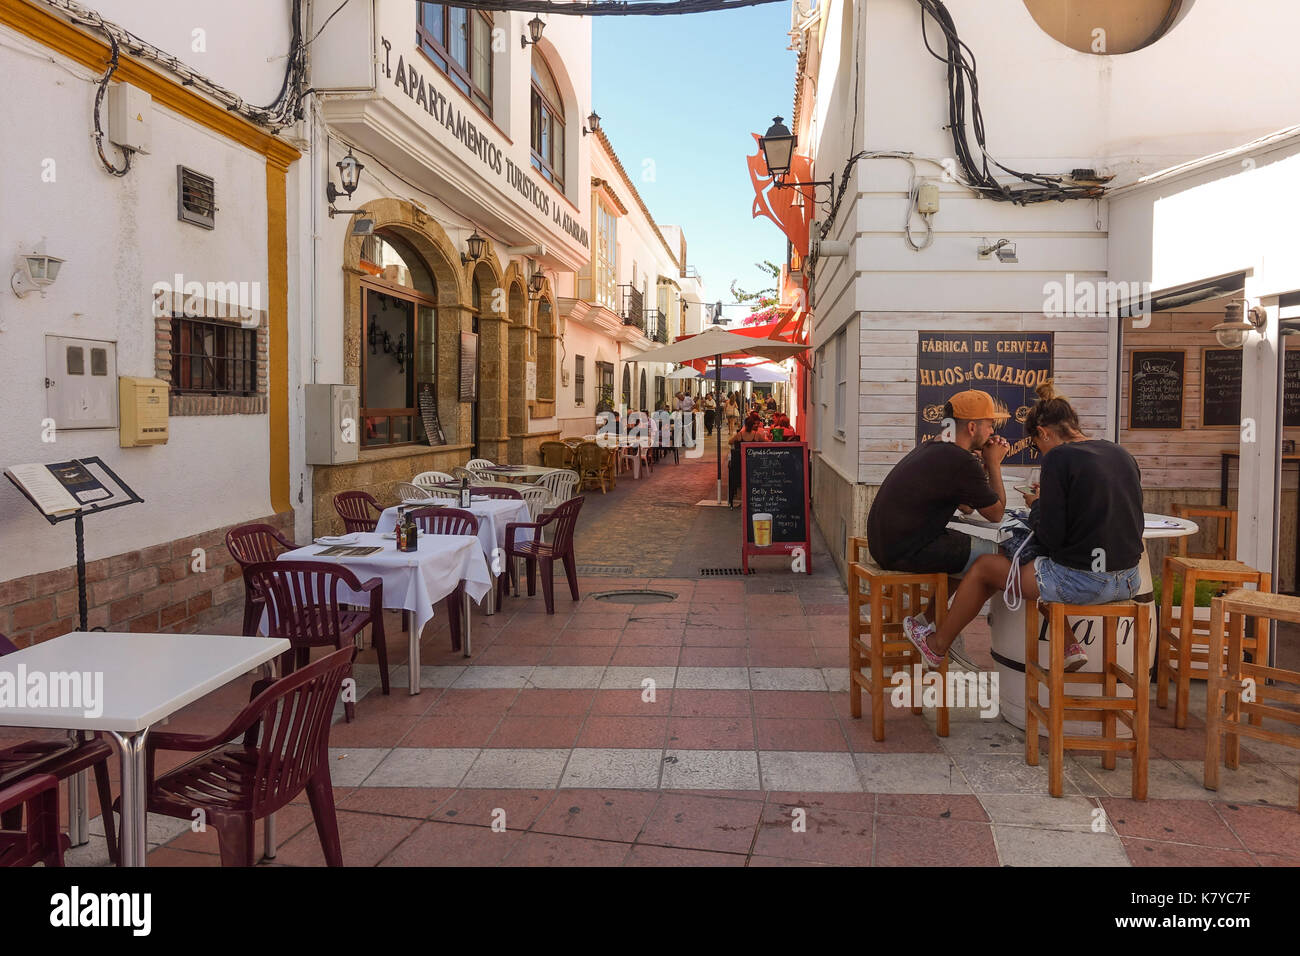 Zahara de los atunes, street view with fish and seafood restaurants, Cadiz,  andalusia, Spain Stock Photo